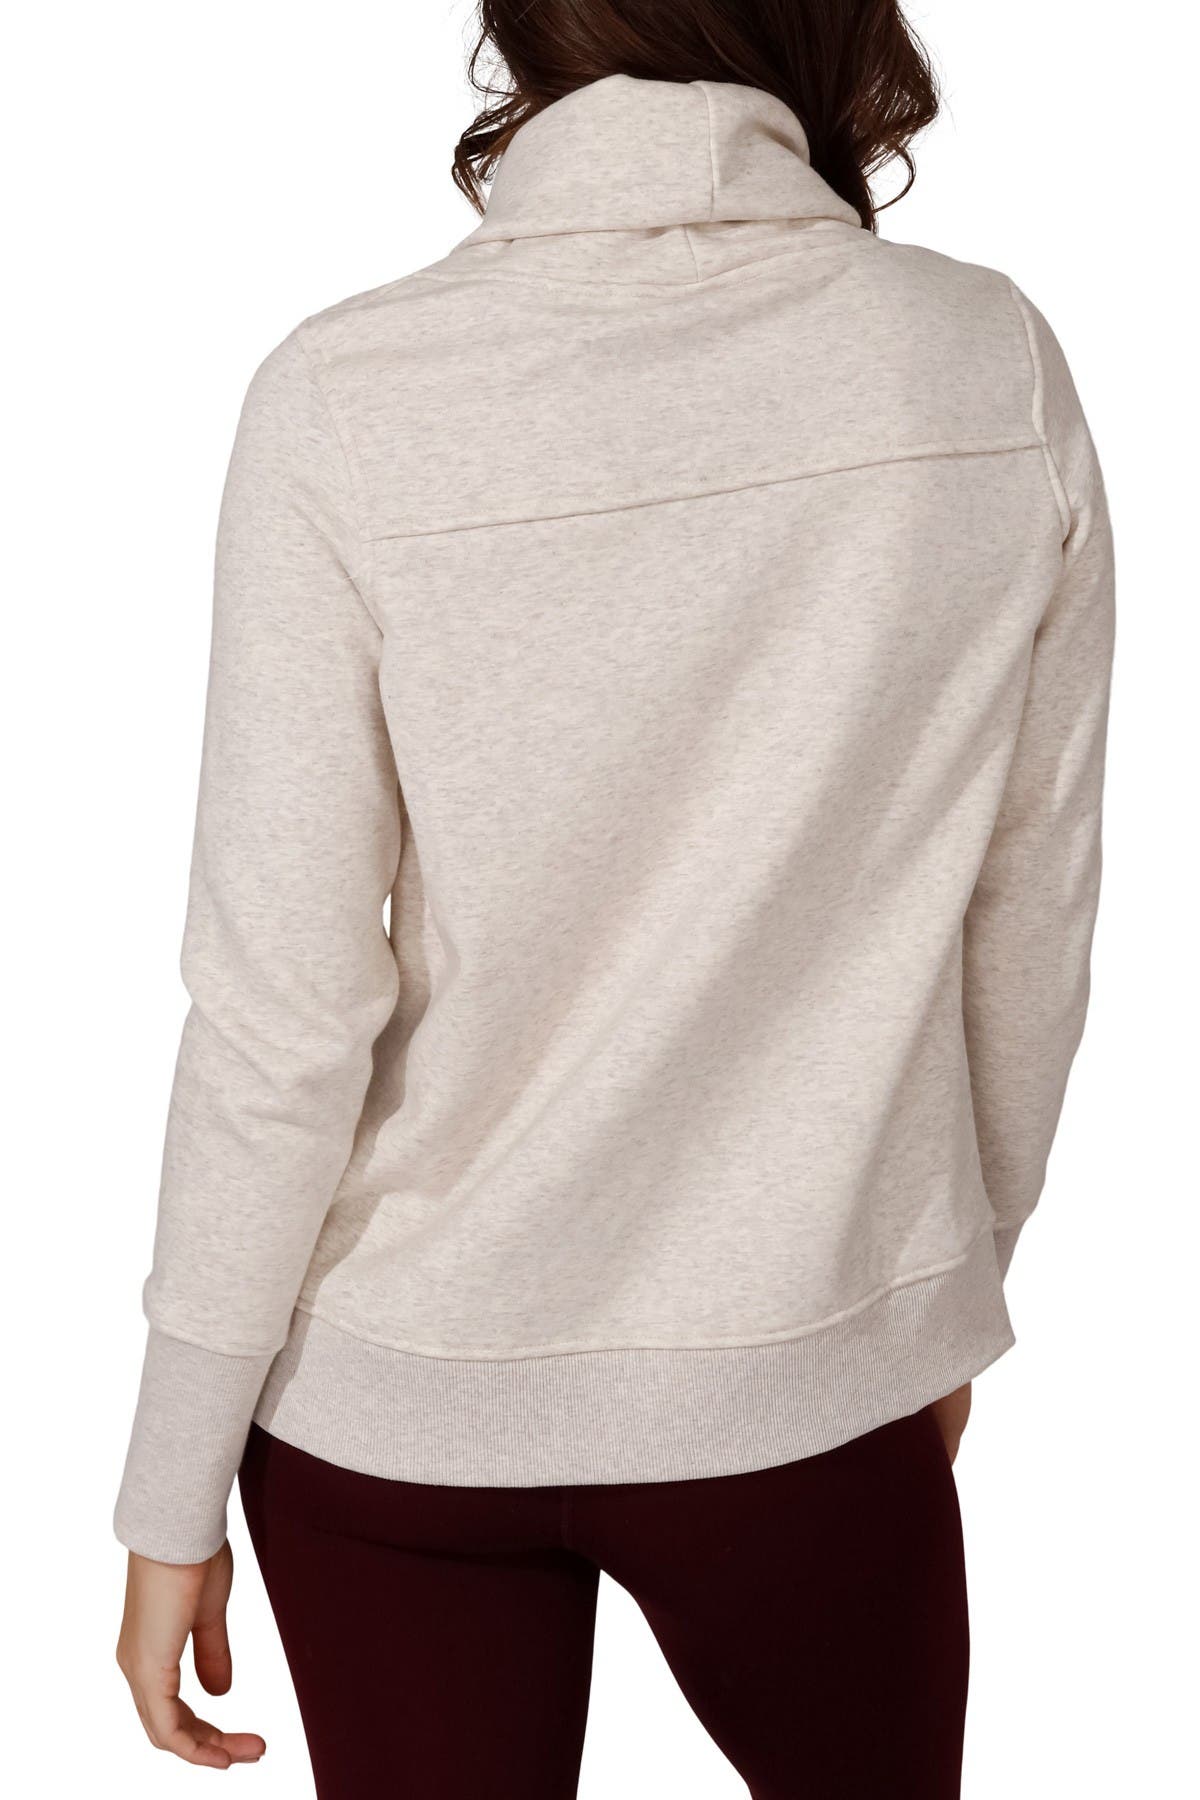 Degree By Reflex Funnel Neck Thumbhole Sleeve Pullover Nordstrom Rack